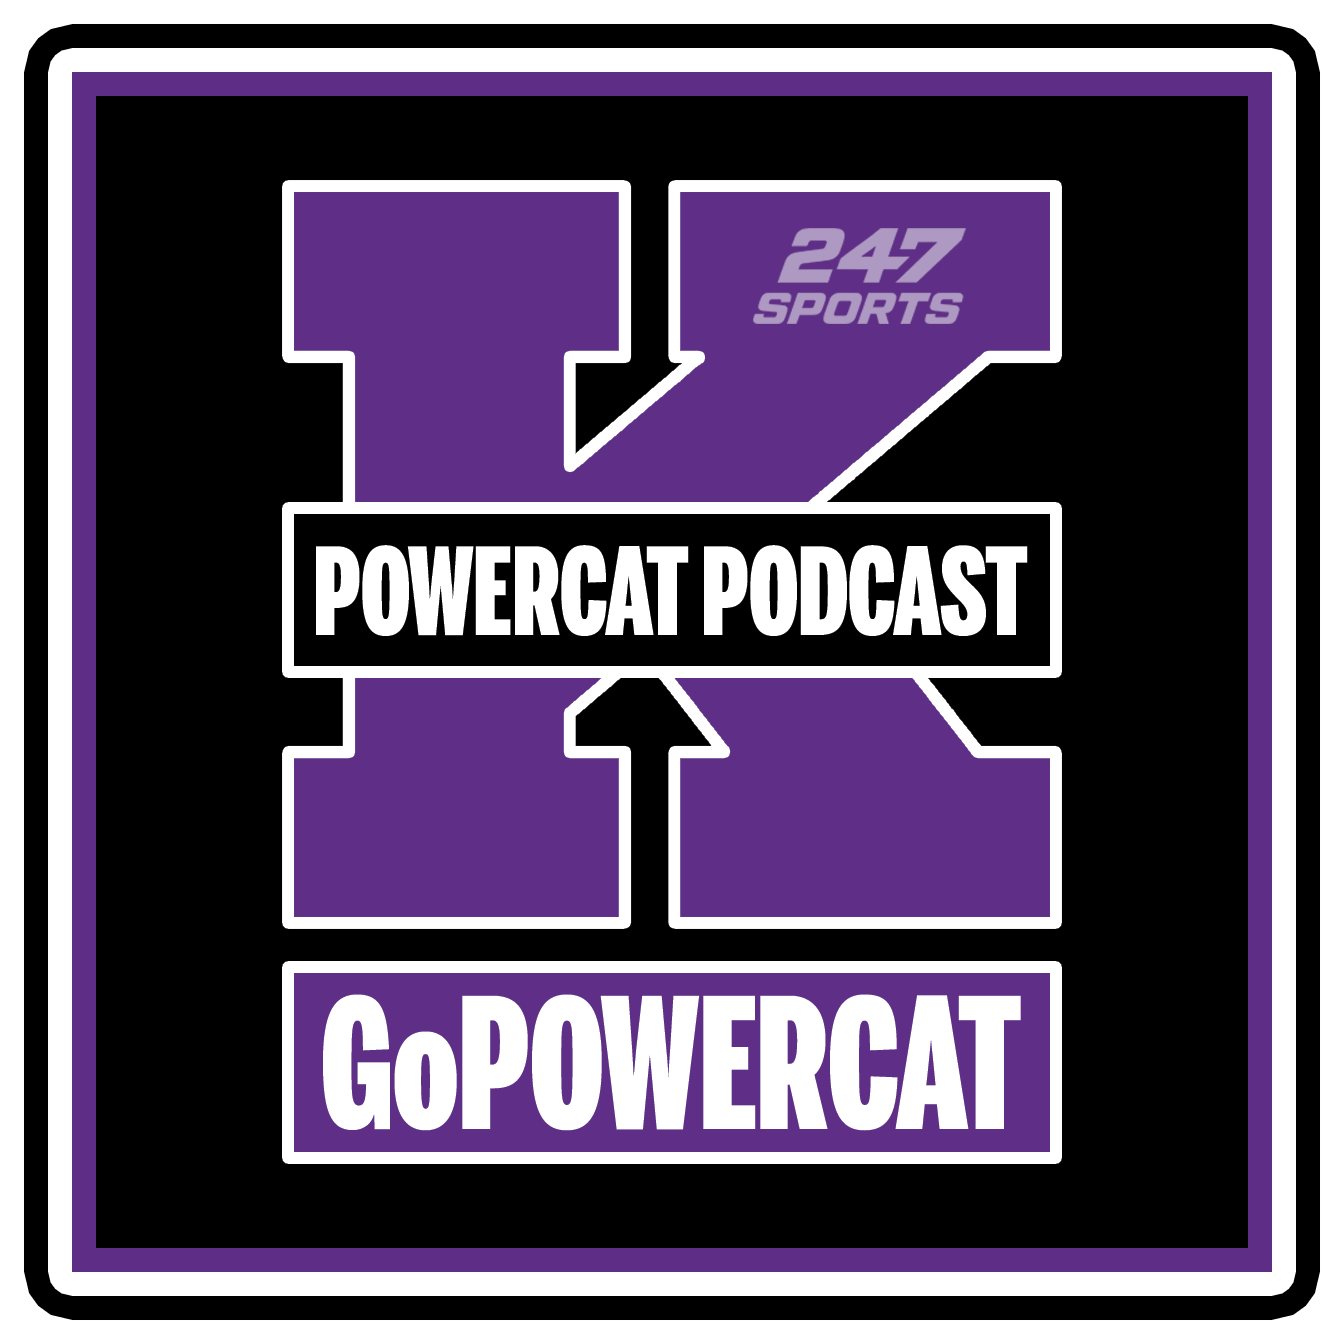 Powercat Podcast | Jerome Tang lands Dug McDaniel, plus much more